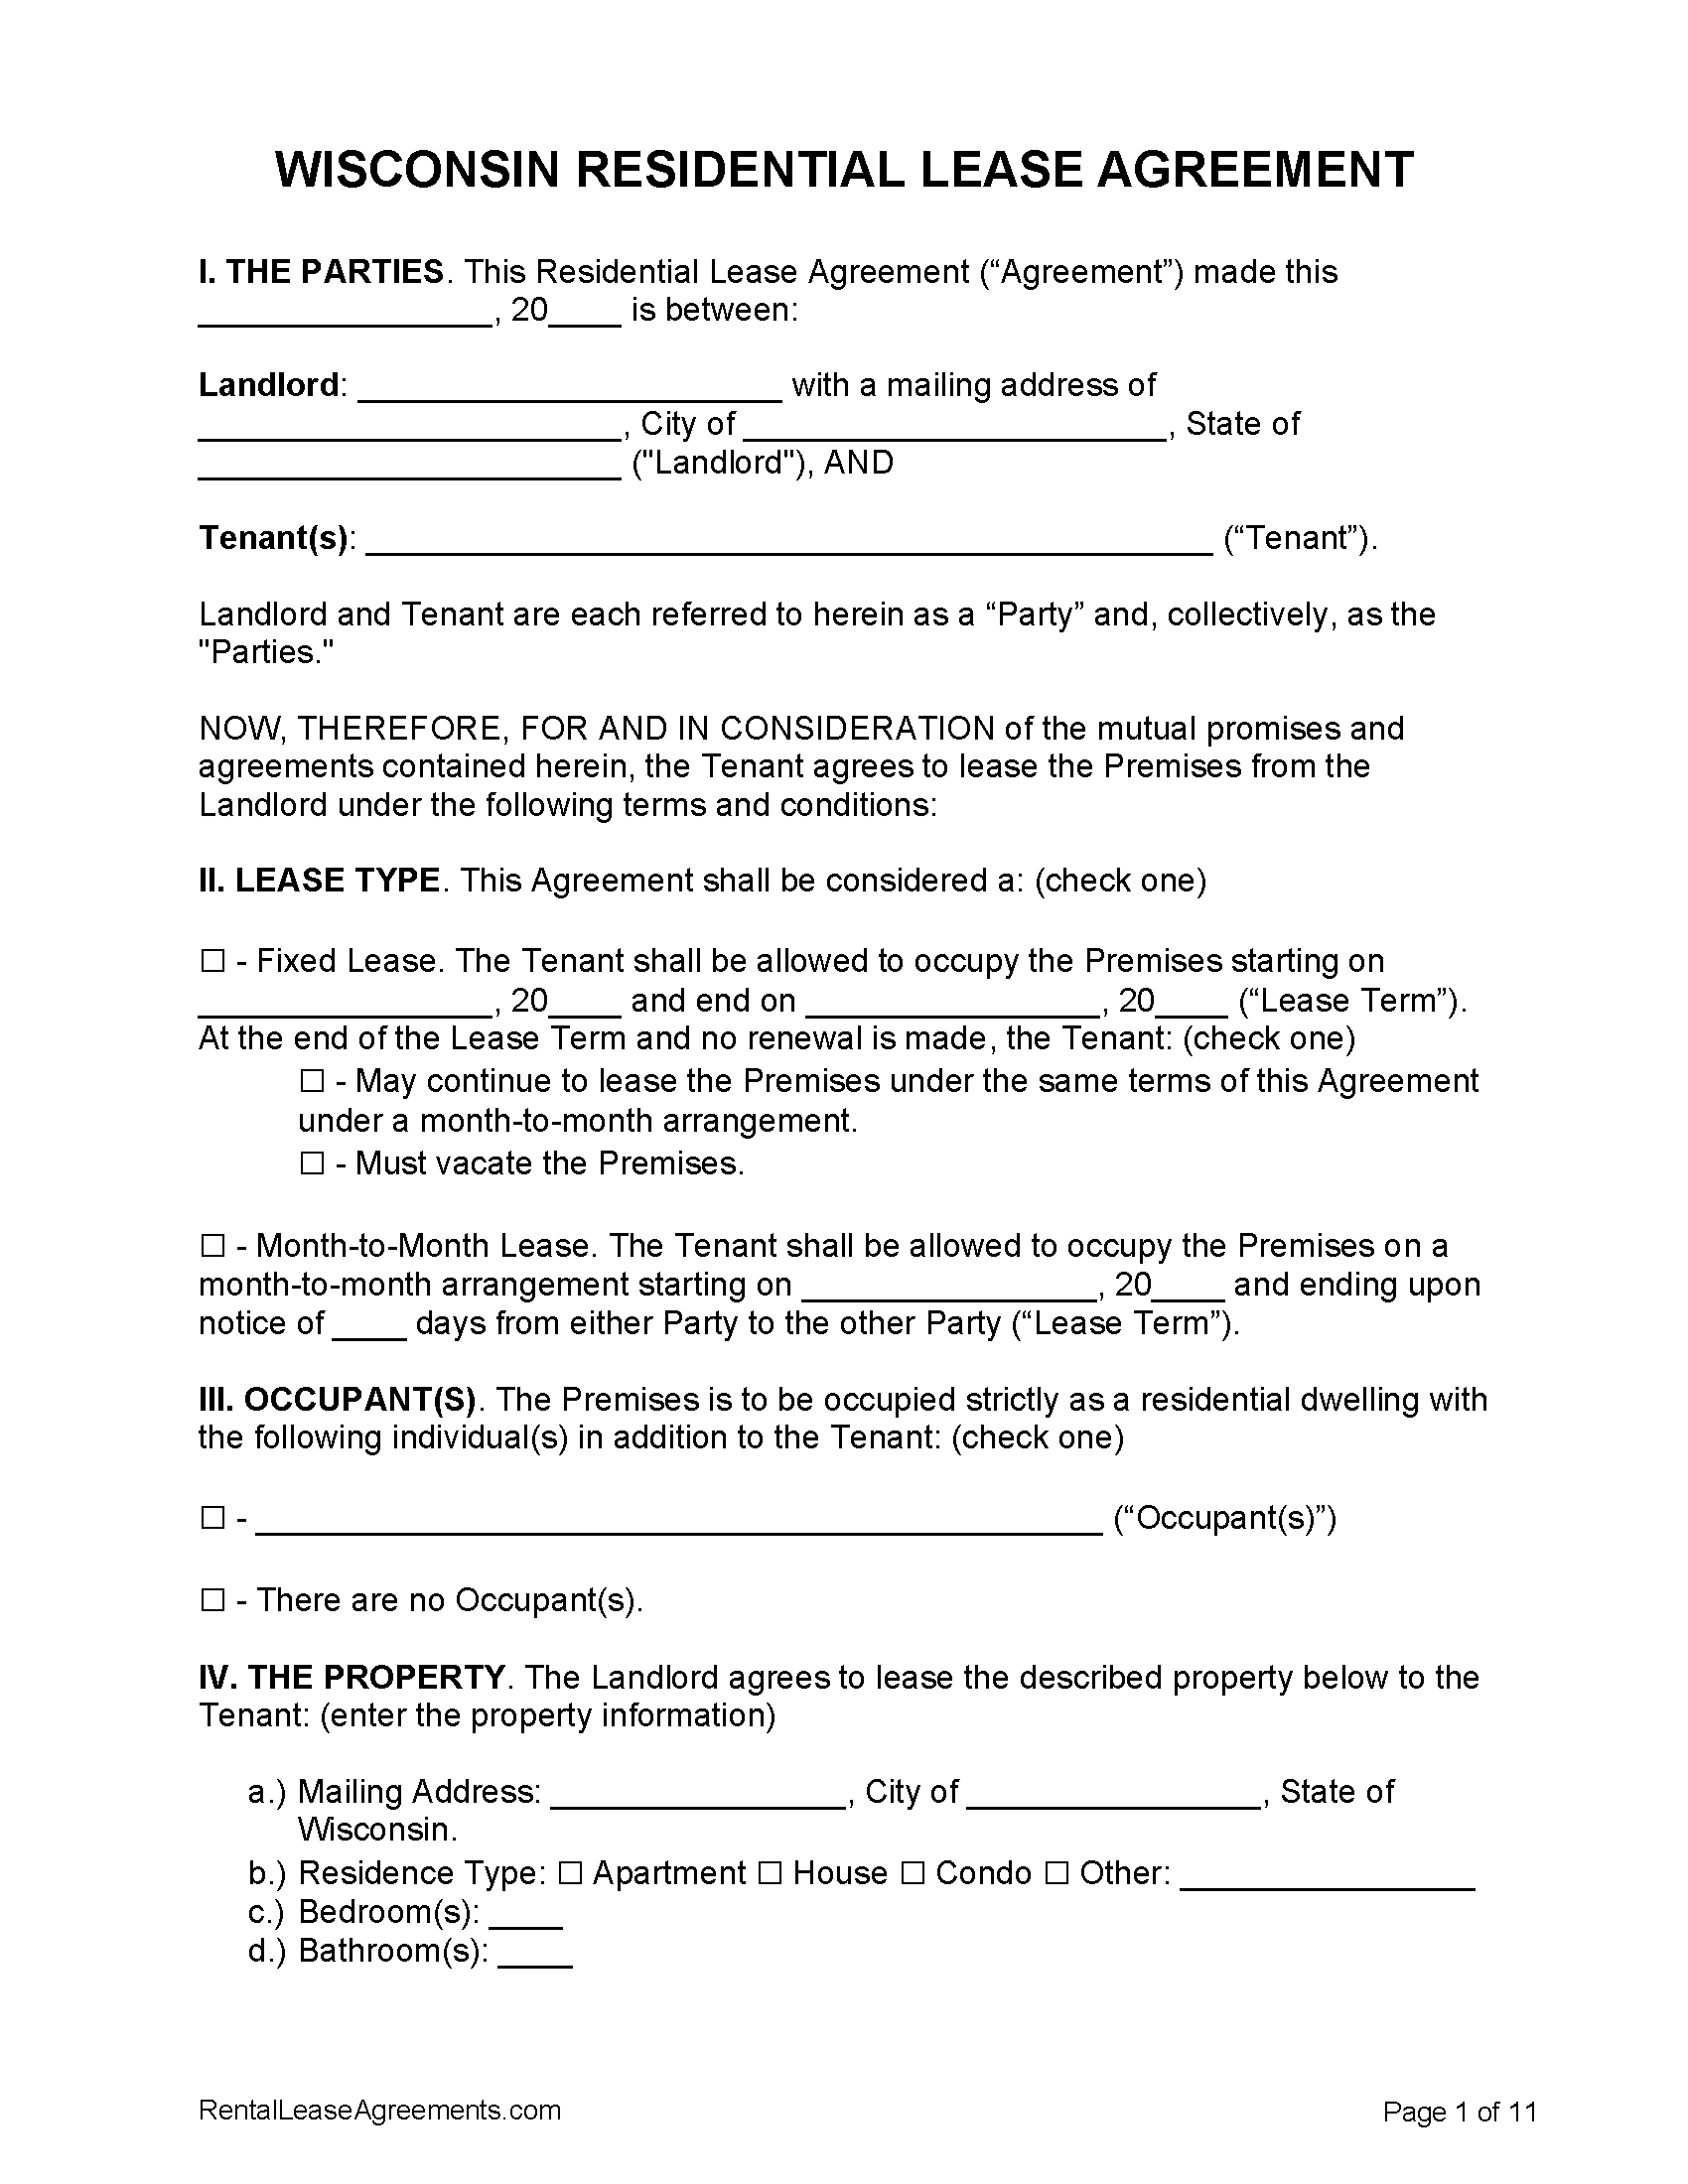 wisconsin-residential-lease-agreement-pdf-ms-word-free-17-simple